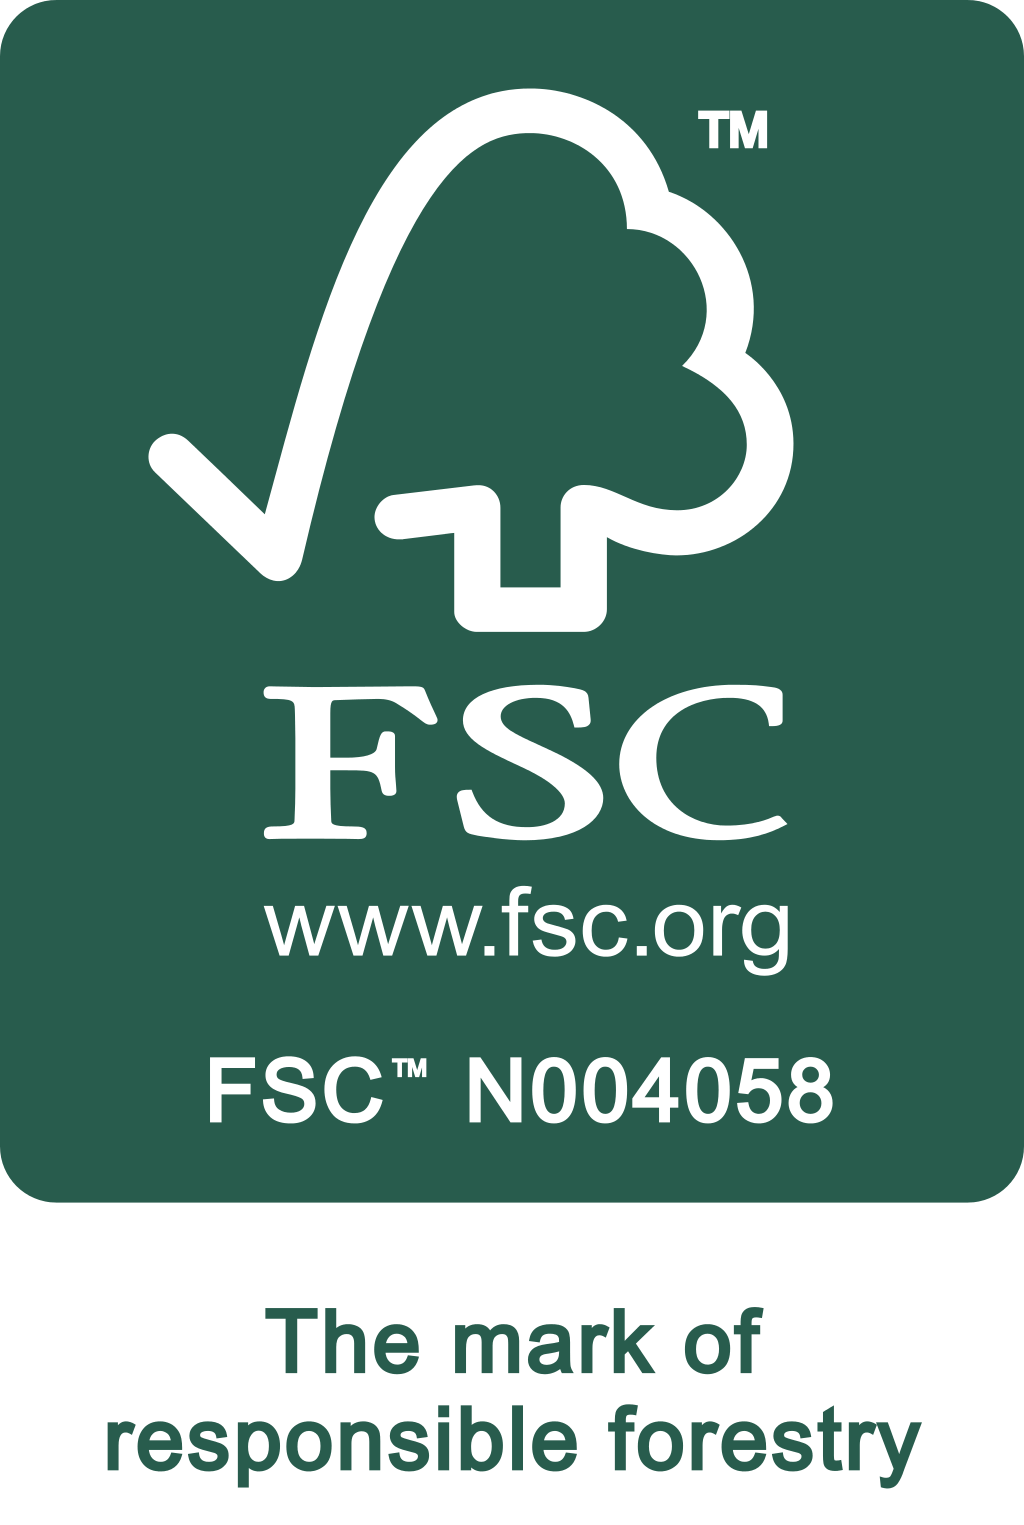 The FSC logo shows the RT-AX59U adopting sustainable packaging made from FSC certified cardboard.